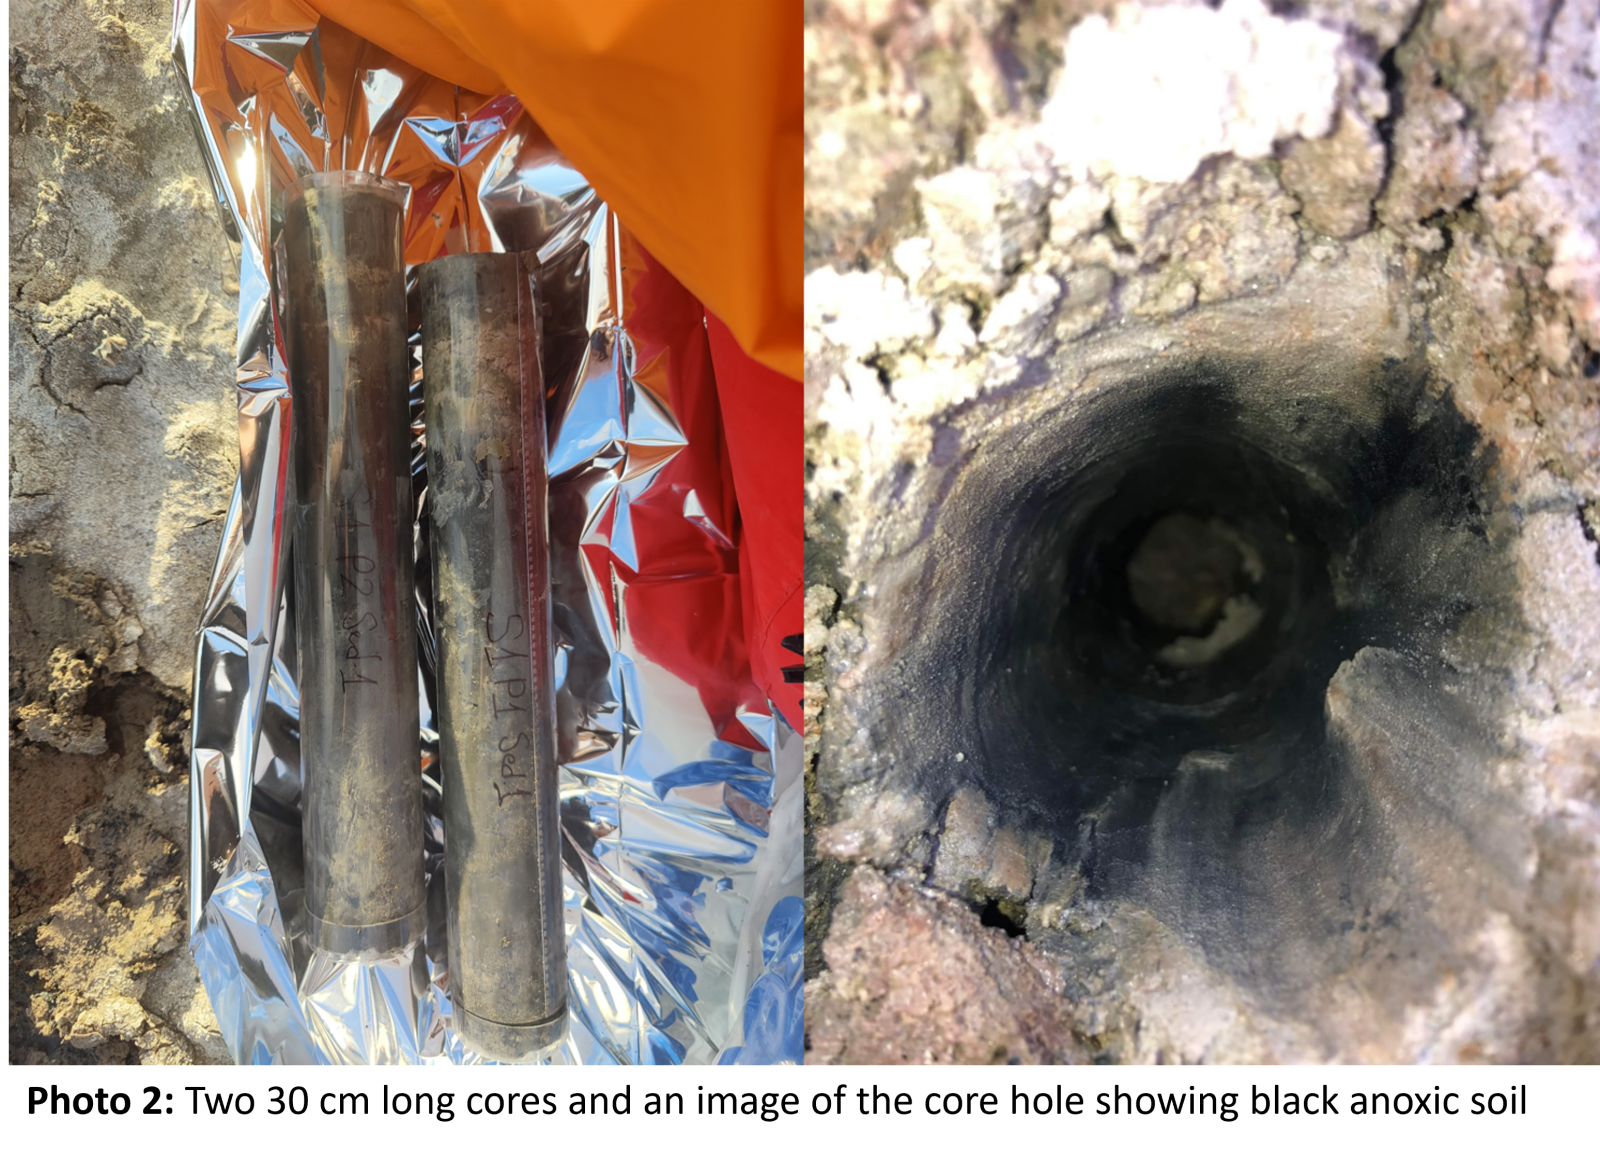 Photo 2: Two 30 cm long cores and an image of the core hole showing black anoxic soil